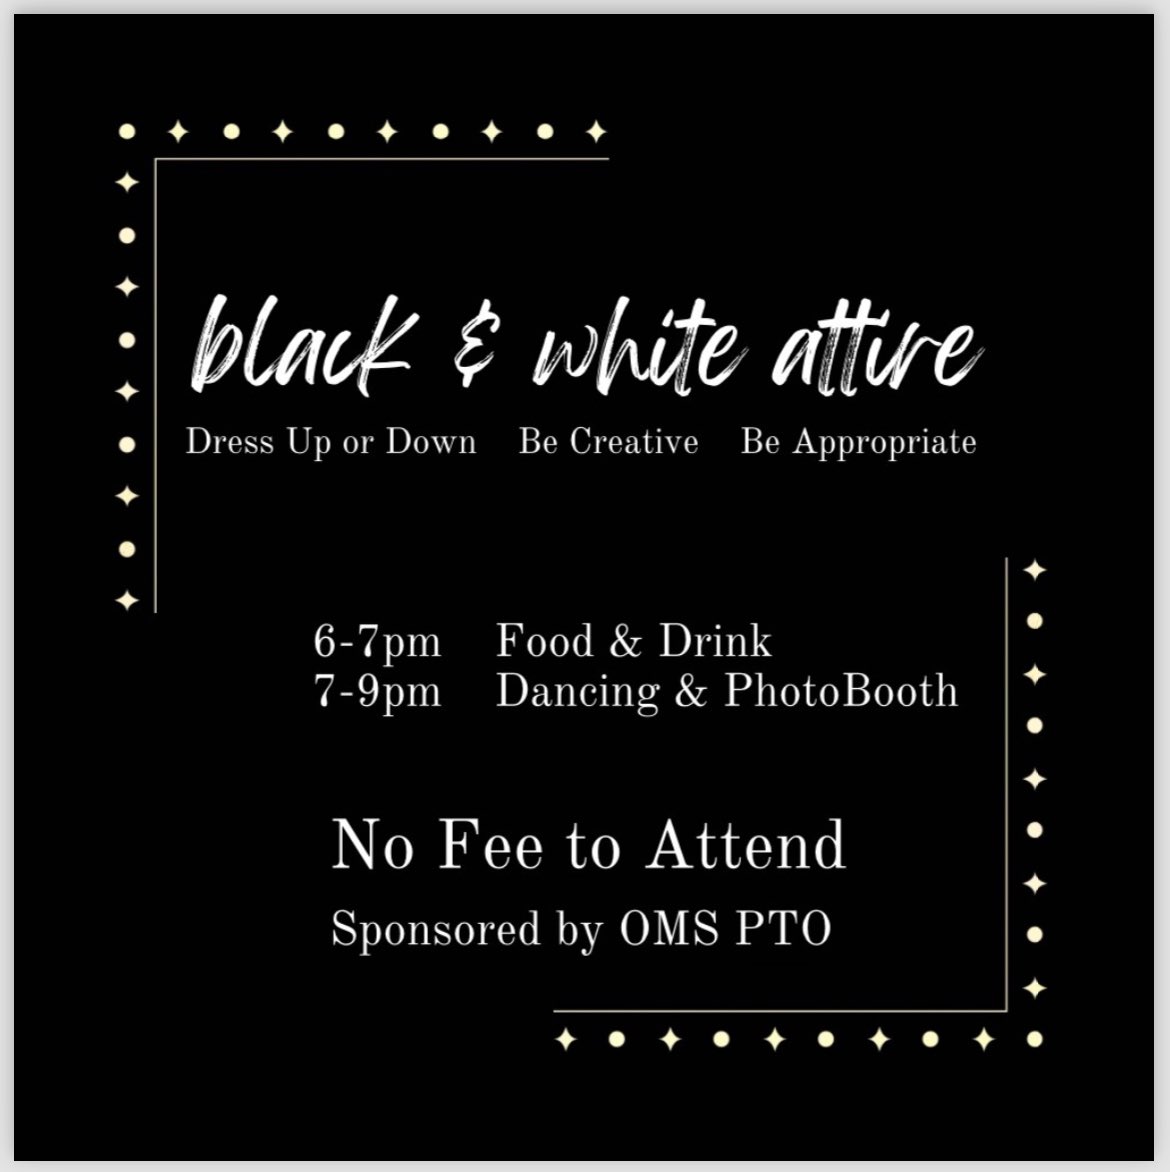 Save the date: April 26 is the 8th grade dance! Black and White attire ⚫️⚪️◼️◻️ 6:00-7:00 – Food/photos; 7:00-9:00 – Dance Sponsored by OMS PTO (FREE for all 8th graders) Formal invitation and parent permission slip to follow - - >@oms_bulldogs @pto_oakridge